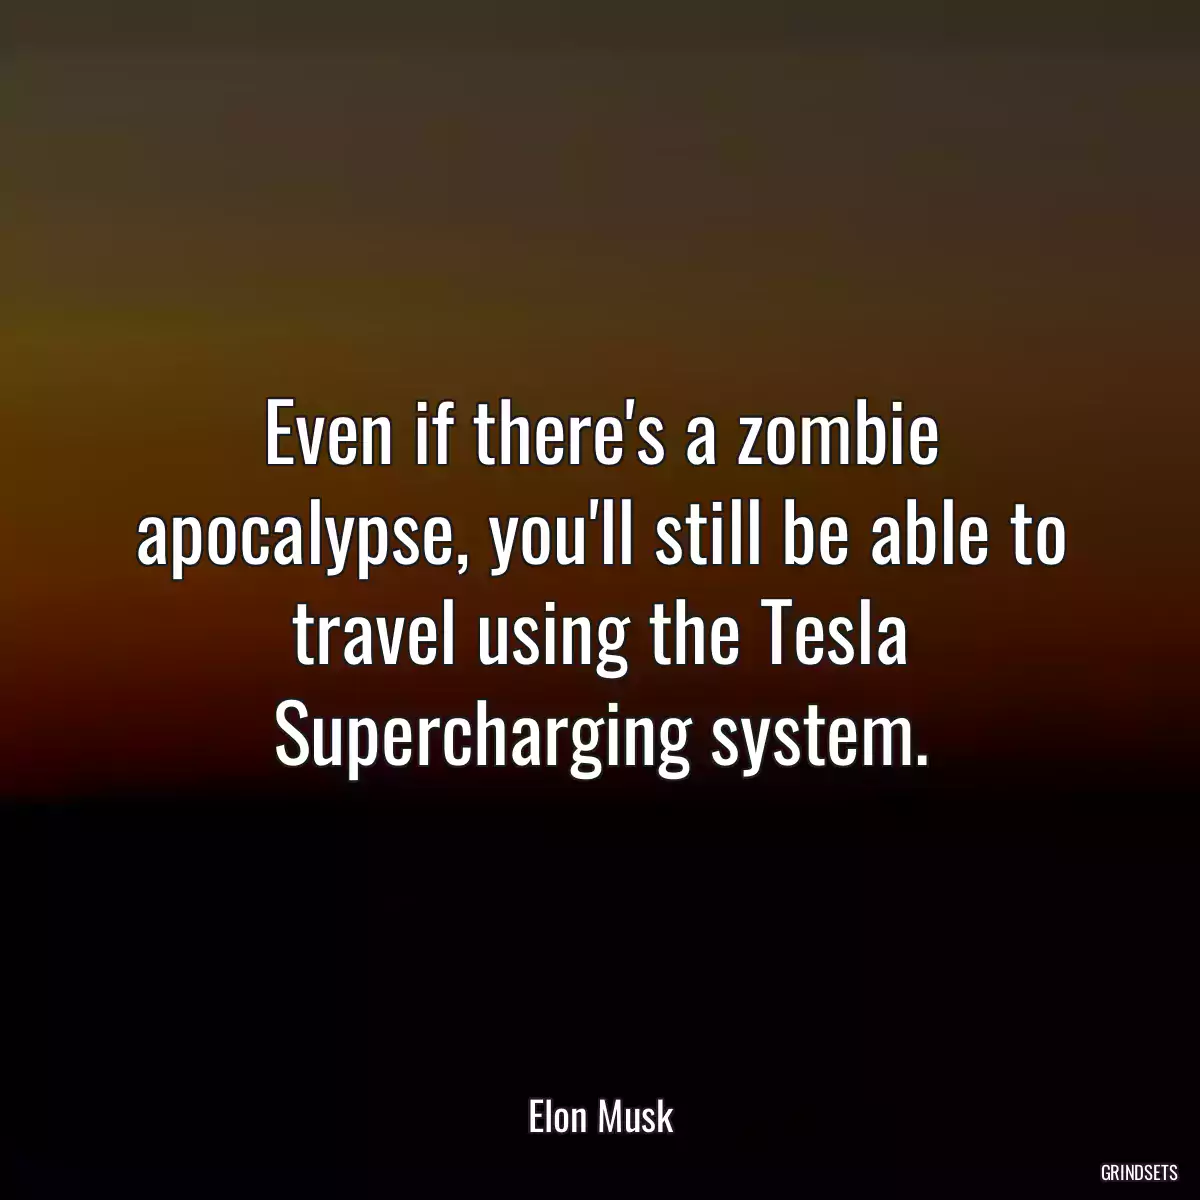 Even if there\'s a zombie apocalypse, you\'ll still be able to travel using the Tesla Supercharging system.